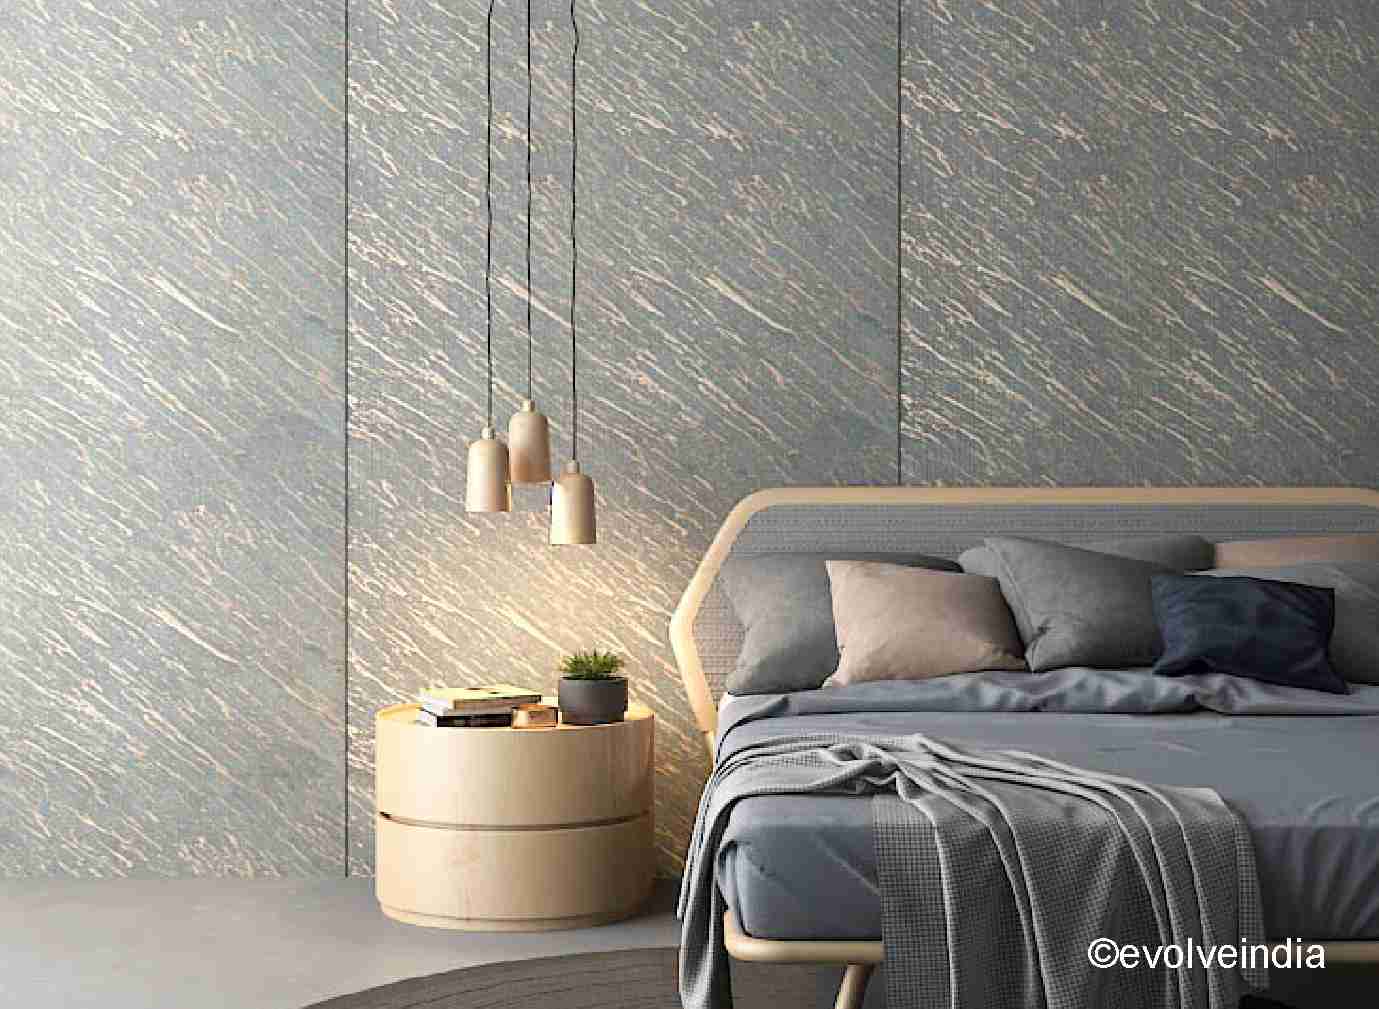 Bedroom wall texture design created using liquid metal wall finishing materials by Evolve India